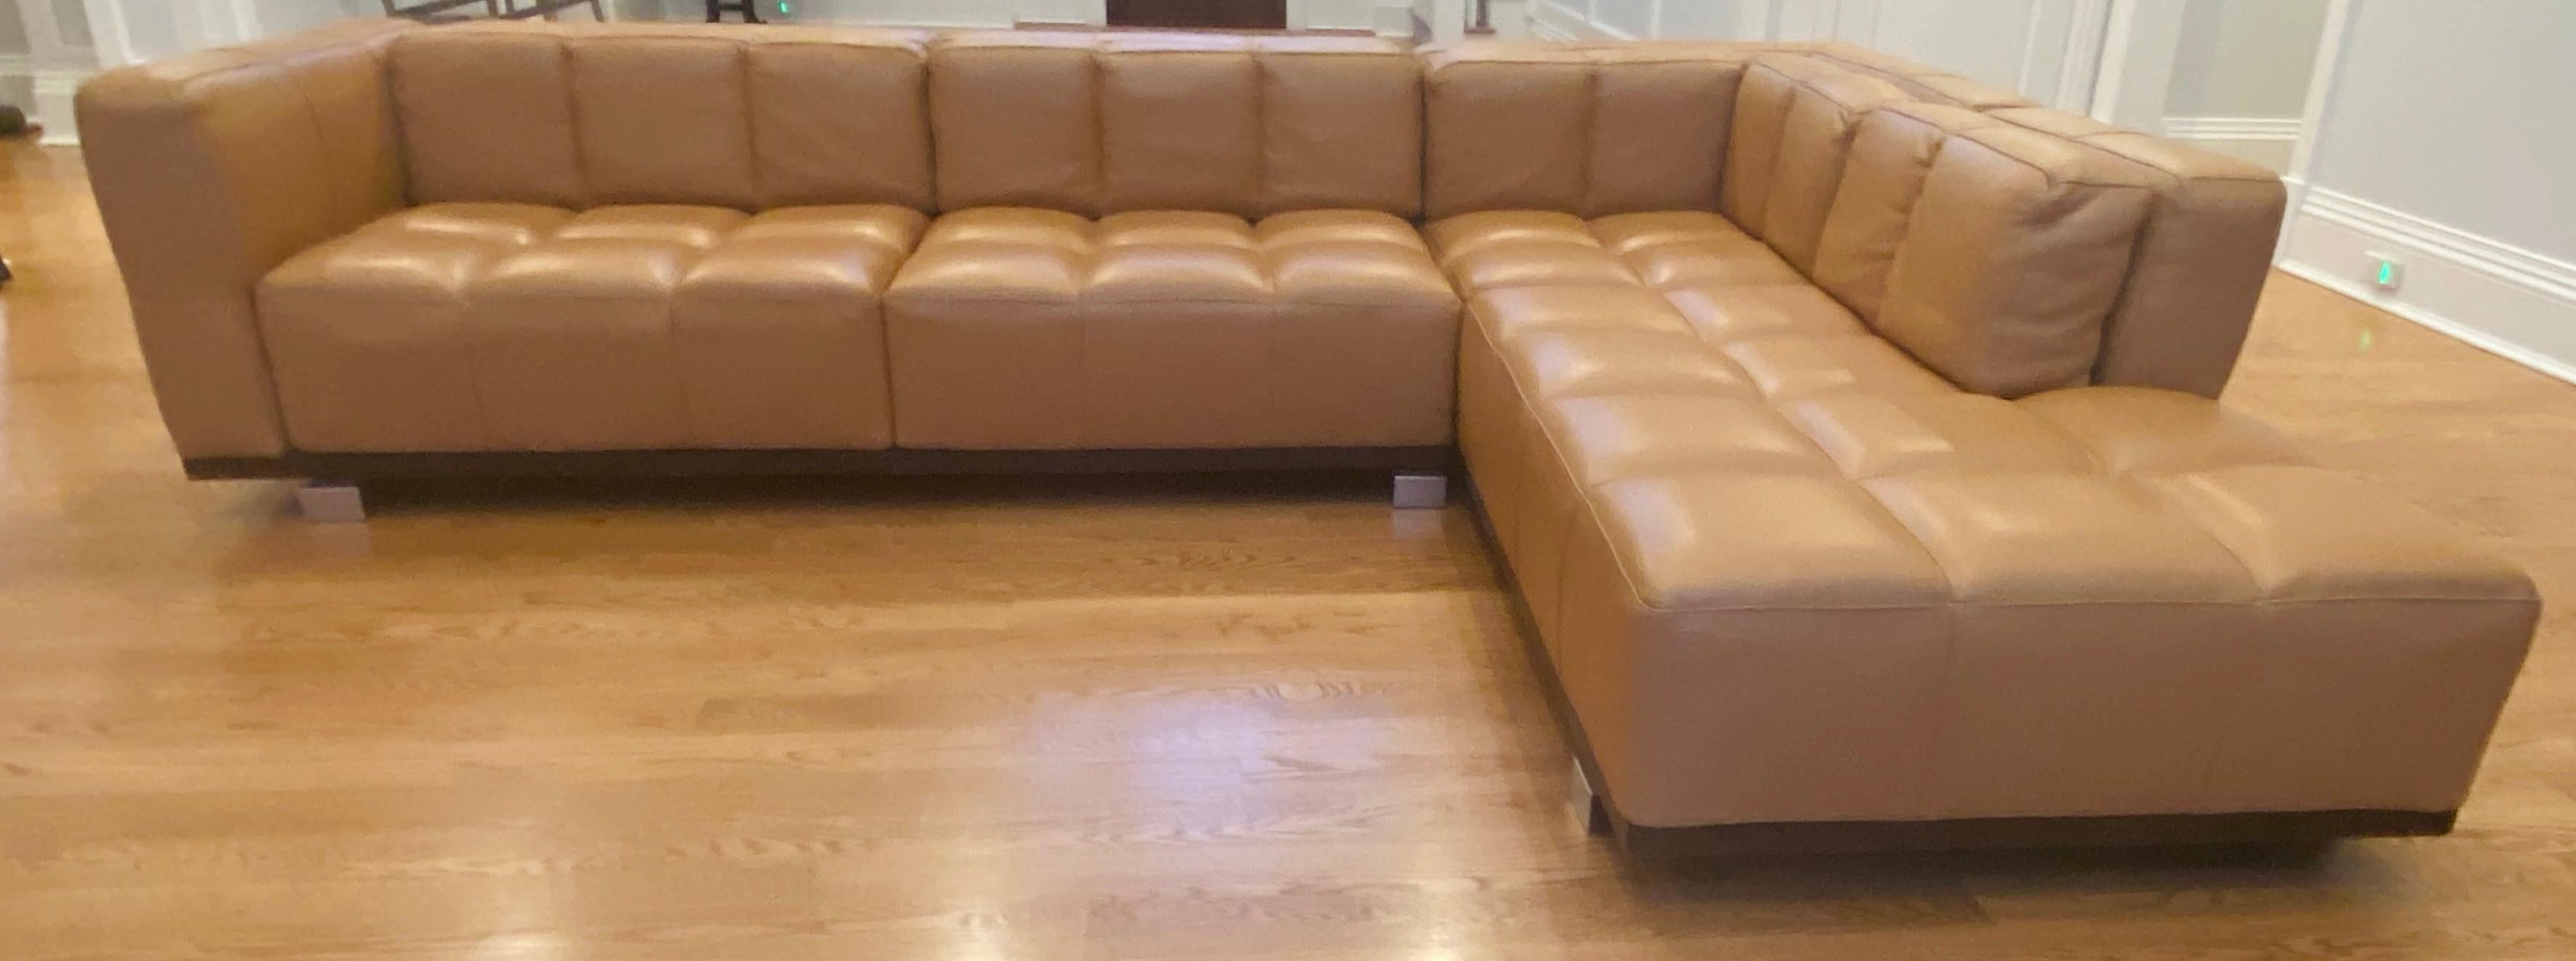 tan leather sectional couch